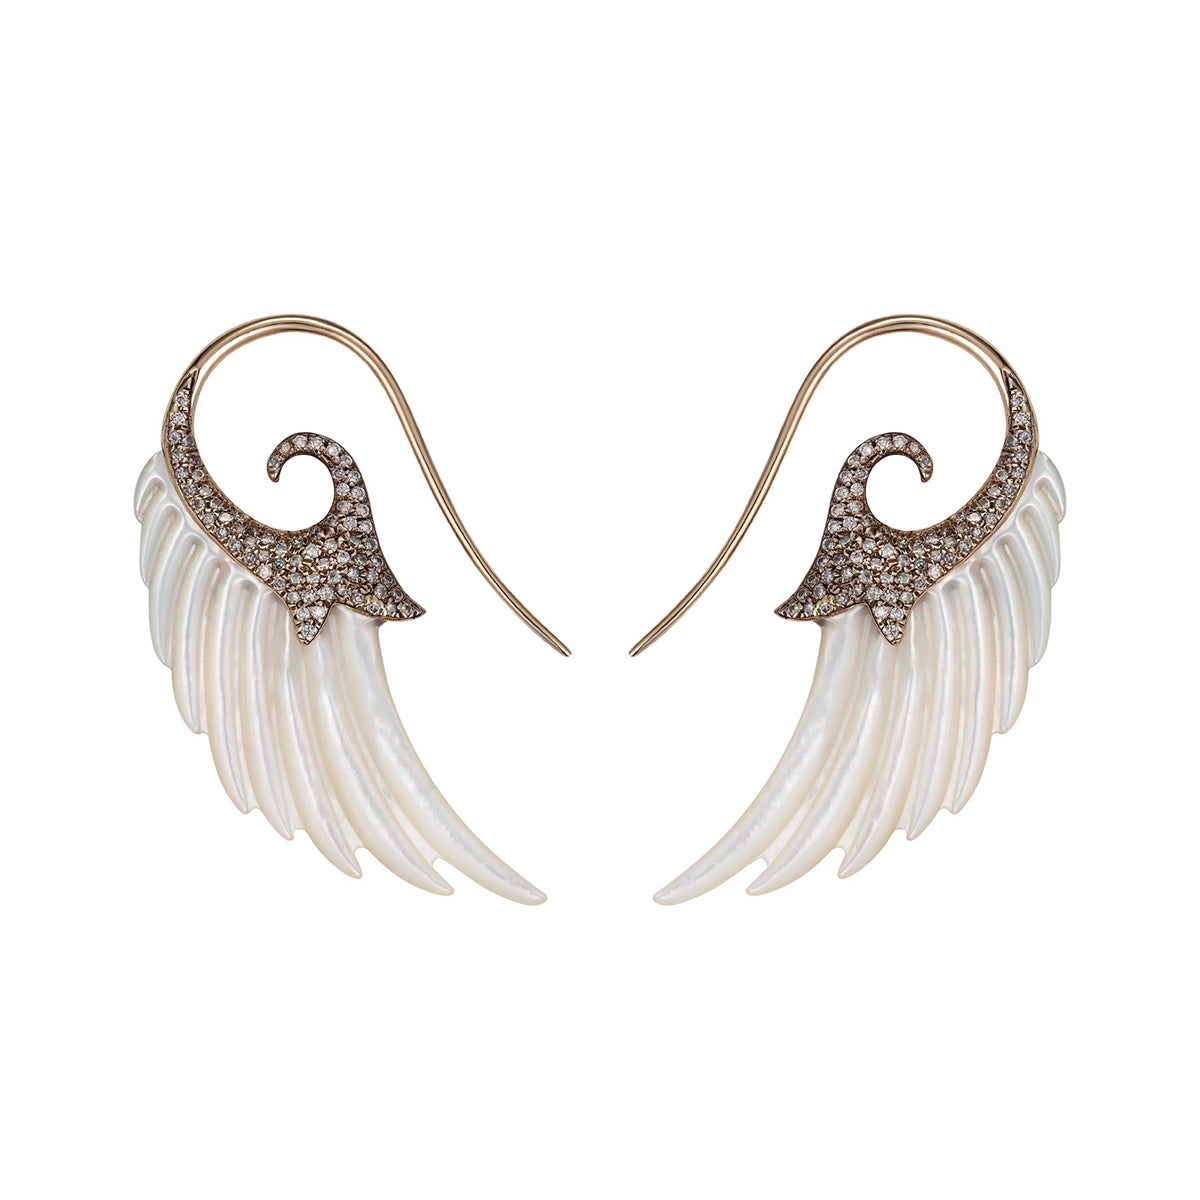 Noor Fares 18K Grey Gold Mother of Pearl Wings Earrings set with Pink Diamonds